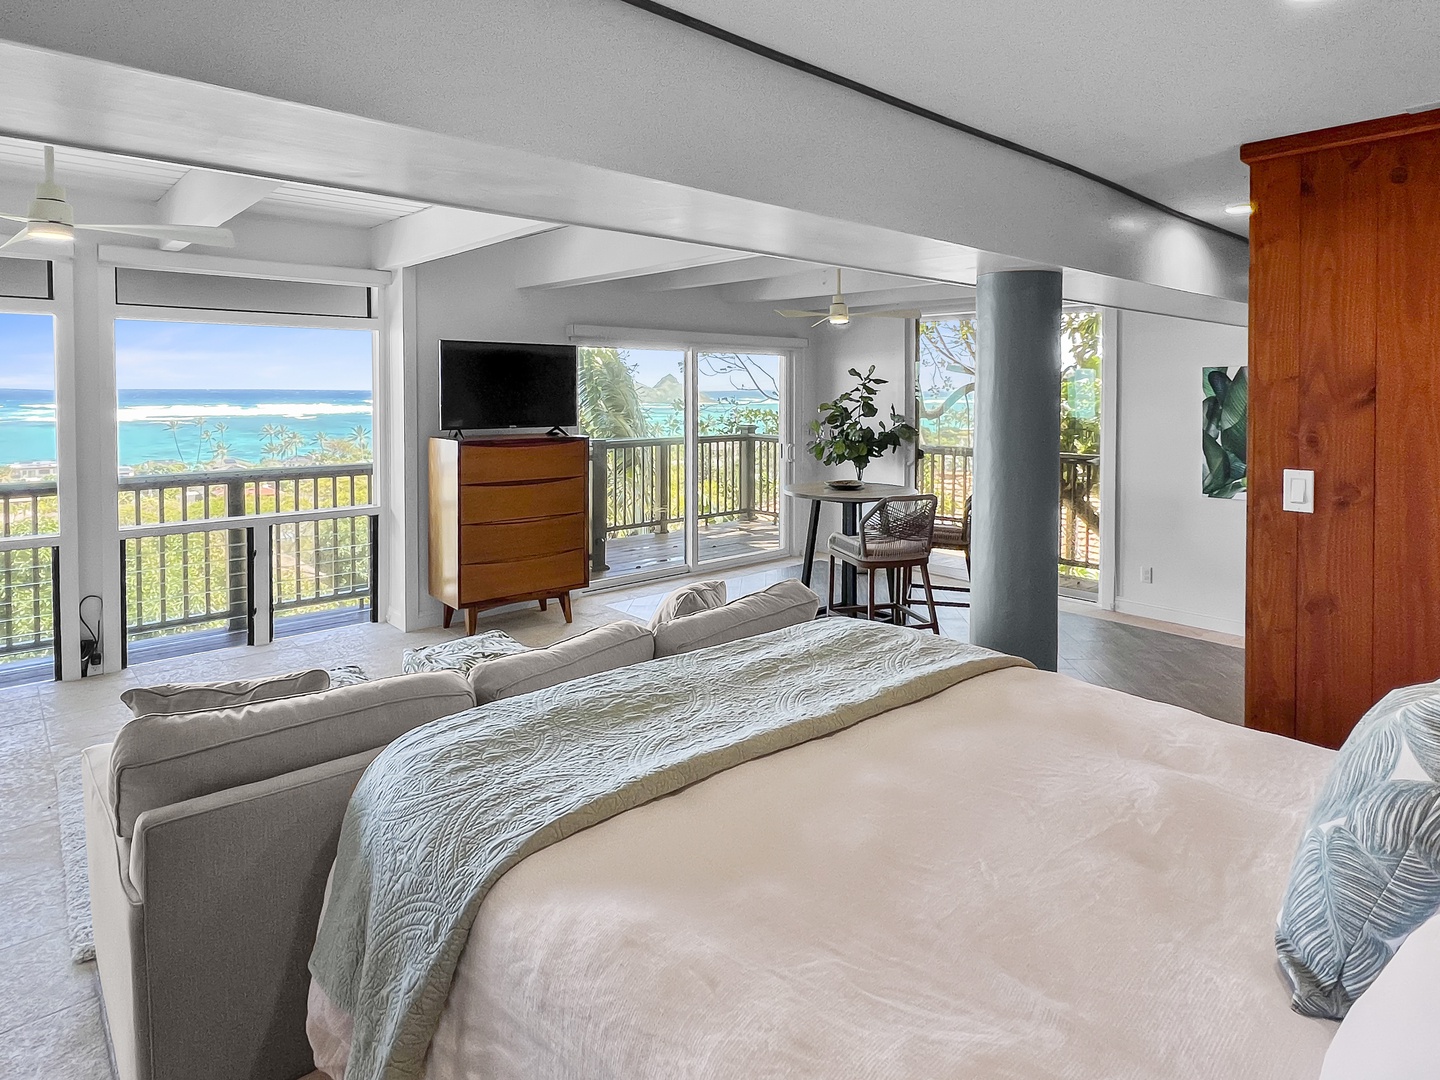 Kailua Vacation Rentals, Hale Lani - Guest bedroom has a flat screen TV, sweeping ocean views, and a private seating area